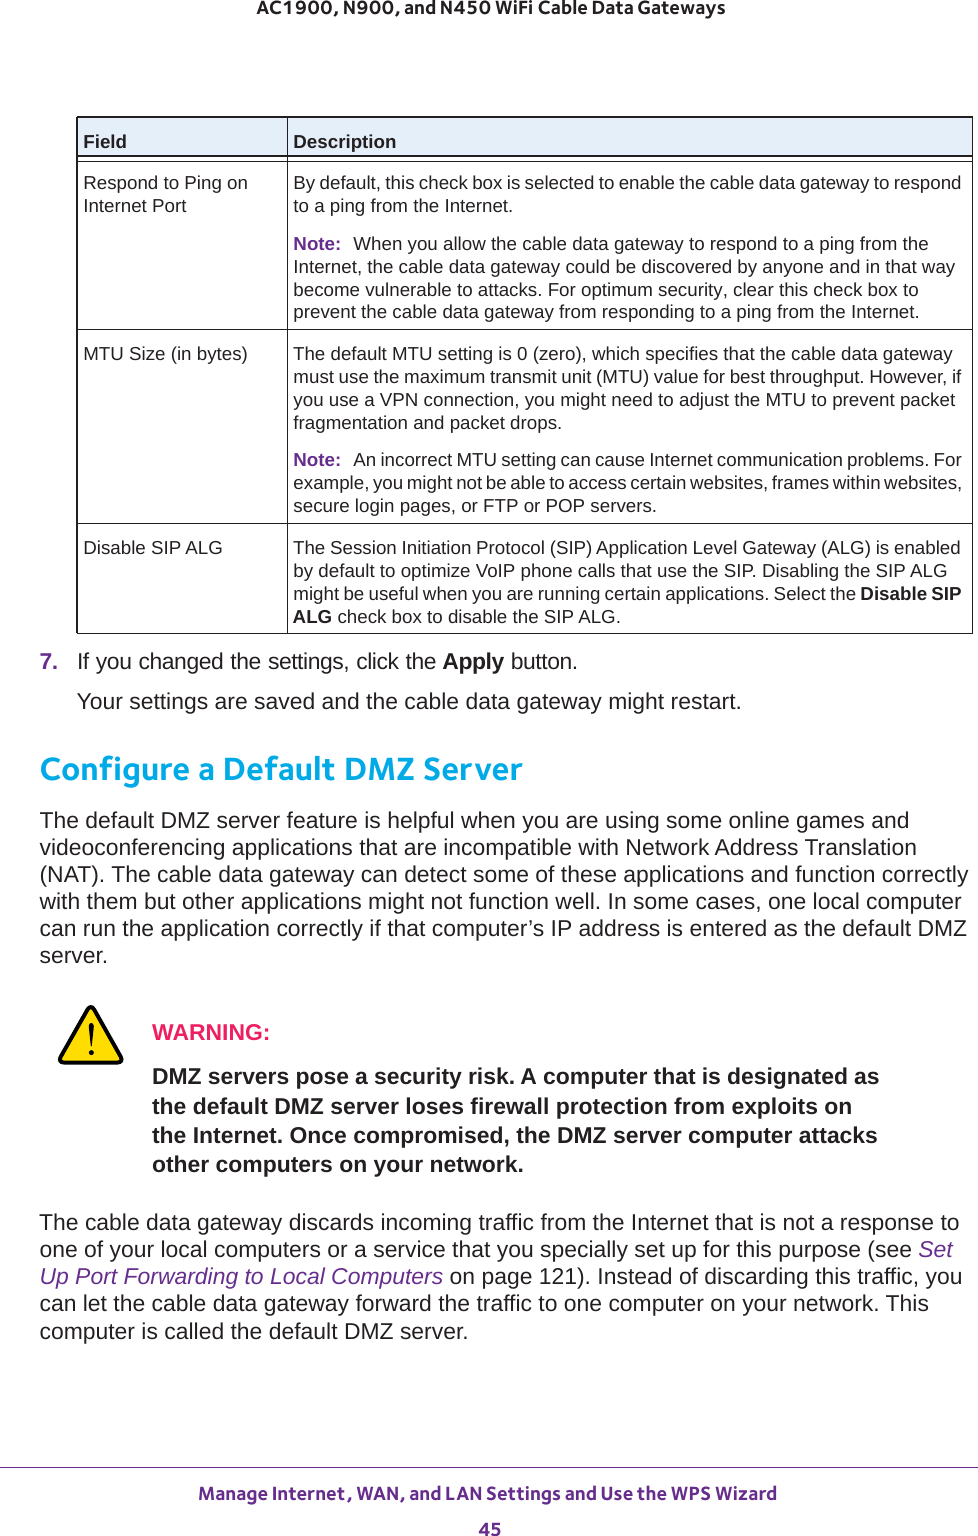 Manage Internet, WAN, and LAN Settings and Use the WPS Wizard 45 AC1900, N900, and N450 WiFi Cable Data Gateways7.  If you changed the settings, click the Apply button.Your settings are saved and the cable data gateway might restart.Configure a Default DMZ ServerThe default DMZ server feature is helpful when you are using some online games and videoconferencing applications that are incompatible with Network Address Translation (NAT). The cable data gateway can detect some of these applications and function correctly with them but other applications might not function well. In some cases, one local computer can run the application correctly if that computer’s IP address is entered as the default DMZ server.WARNING:DMZ servers pose a security risk. A computer that is designated as the default DMZ server loses firewall protection from exploits on the Internet. Once compromised, the DMZ server computer attacks other computers on your network.The cable data gateway discards incoming traffic from the Internet that is not a response to one of your local computers or a service that you specially set up for this purpose (see Set Up Port Forwarding to Local Computers on page  121). Instead of discarding this traffic, you can let the cable data gateway forward the traffic to one computer on your network. This computer is called the default DMZ server.Respond to Ping on Internet PortBy default, this check box is selected to enable the cable data gateway to respond to a ping from the Internet. Note: When you allow the cable data gateway to respond to a ping from the Internet, the cable data gateway could be discovered by anyone and in that way become vulnerable to attacks. For optimum security, clear this check box to prevent the cable data gateway from responding to a ping from the Internet.MTU Size (in bytes) The default MTU setting is 0 (zero), which specifies that the cable data gateway must use the maximum transmit unit (MTU) value for best throughput. However, if you use a VPN connection, you might need to adjust the MTU to prevent packet fragmentation and packet drops.Note: An incorrect MTU setting can cause Internet communication problems. For example, you might not be able to access certain websites, frames within websites, secure login pages, or FTP or POP servers.Disable SIP ALG The Session Initiation Protocol (SIP) Application Level Gateway (ALG) is enabled by default to optimize VoIP phone calls that use the SIP. Disabling the SIP ALG might be useful when you are running certain applications. Select the Disable SIP ALG check box to disable the SIP ALG.Field Description